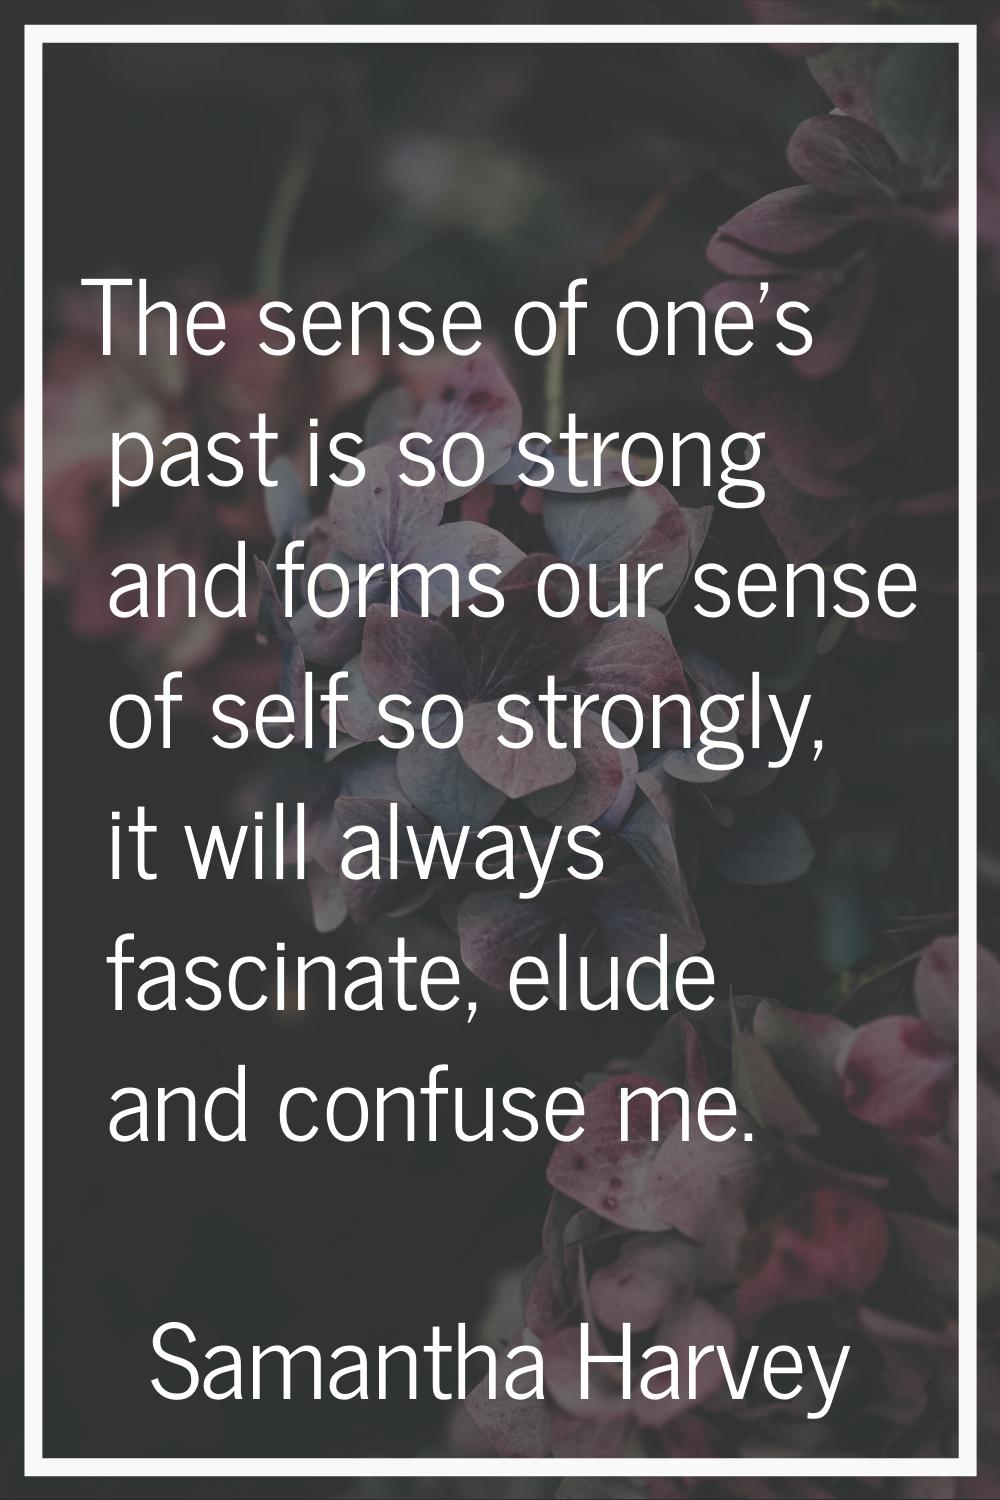 The sense of one's past is so strong and forms our sense of self so strongly, it will always fascin